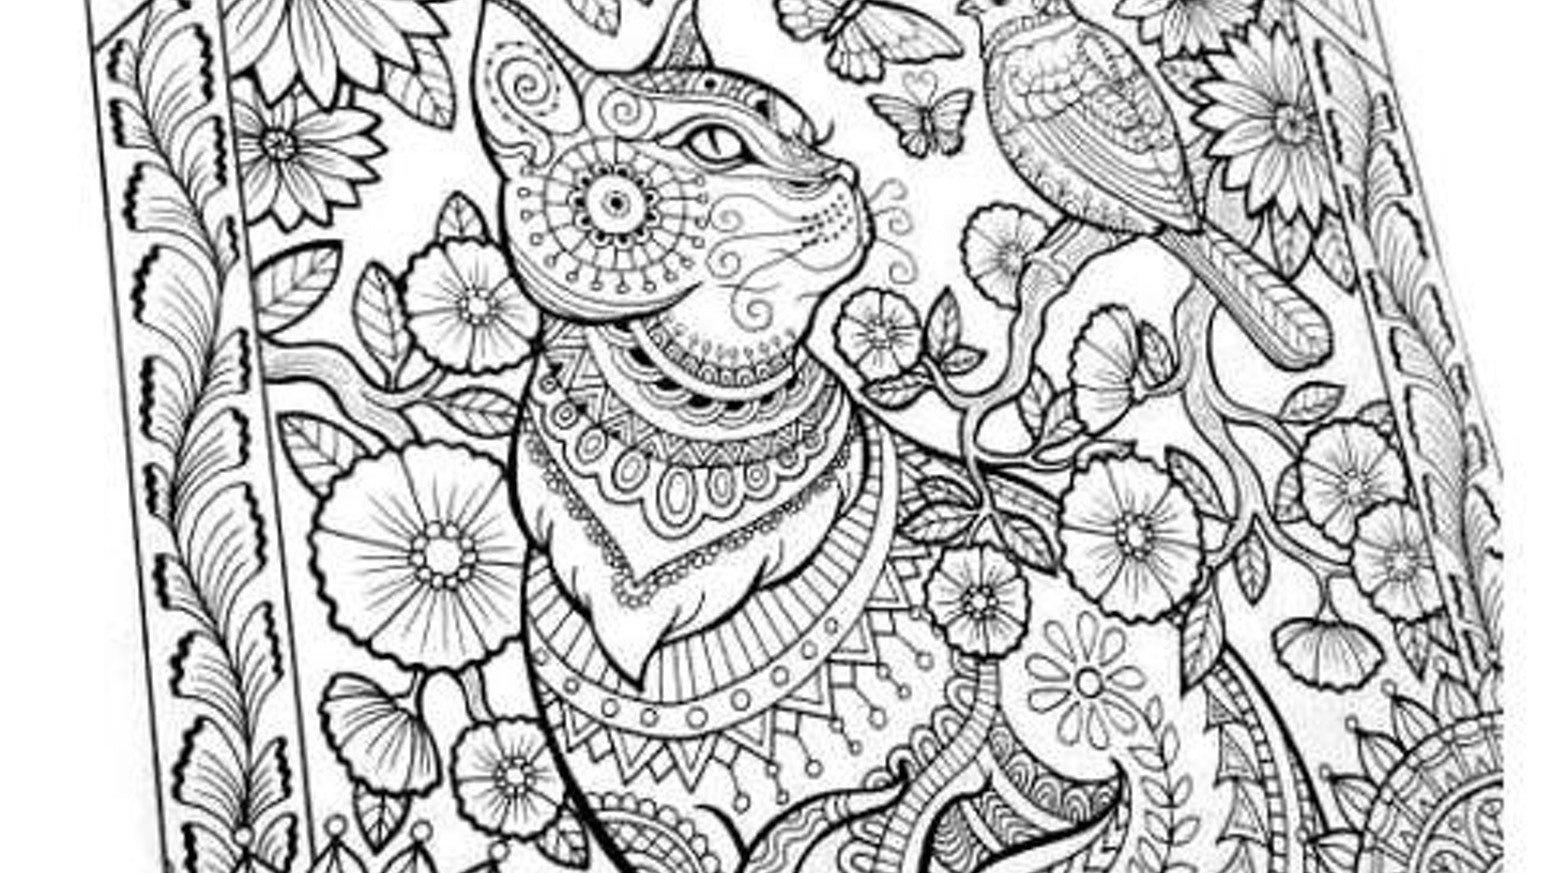 Large Coloring Books For Adults
 Coloring book for adults large spiral bound by Jan